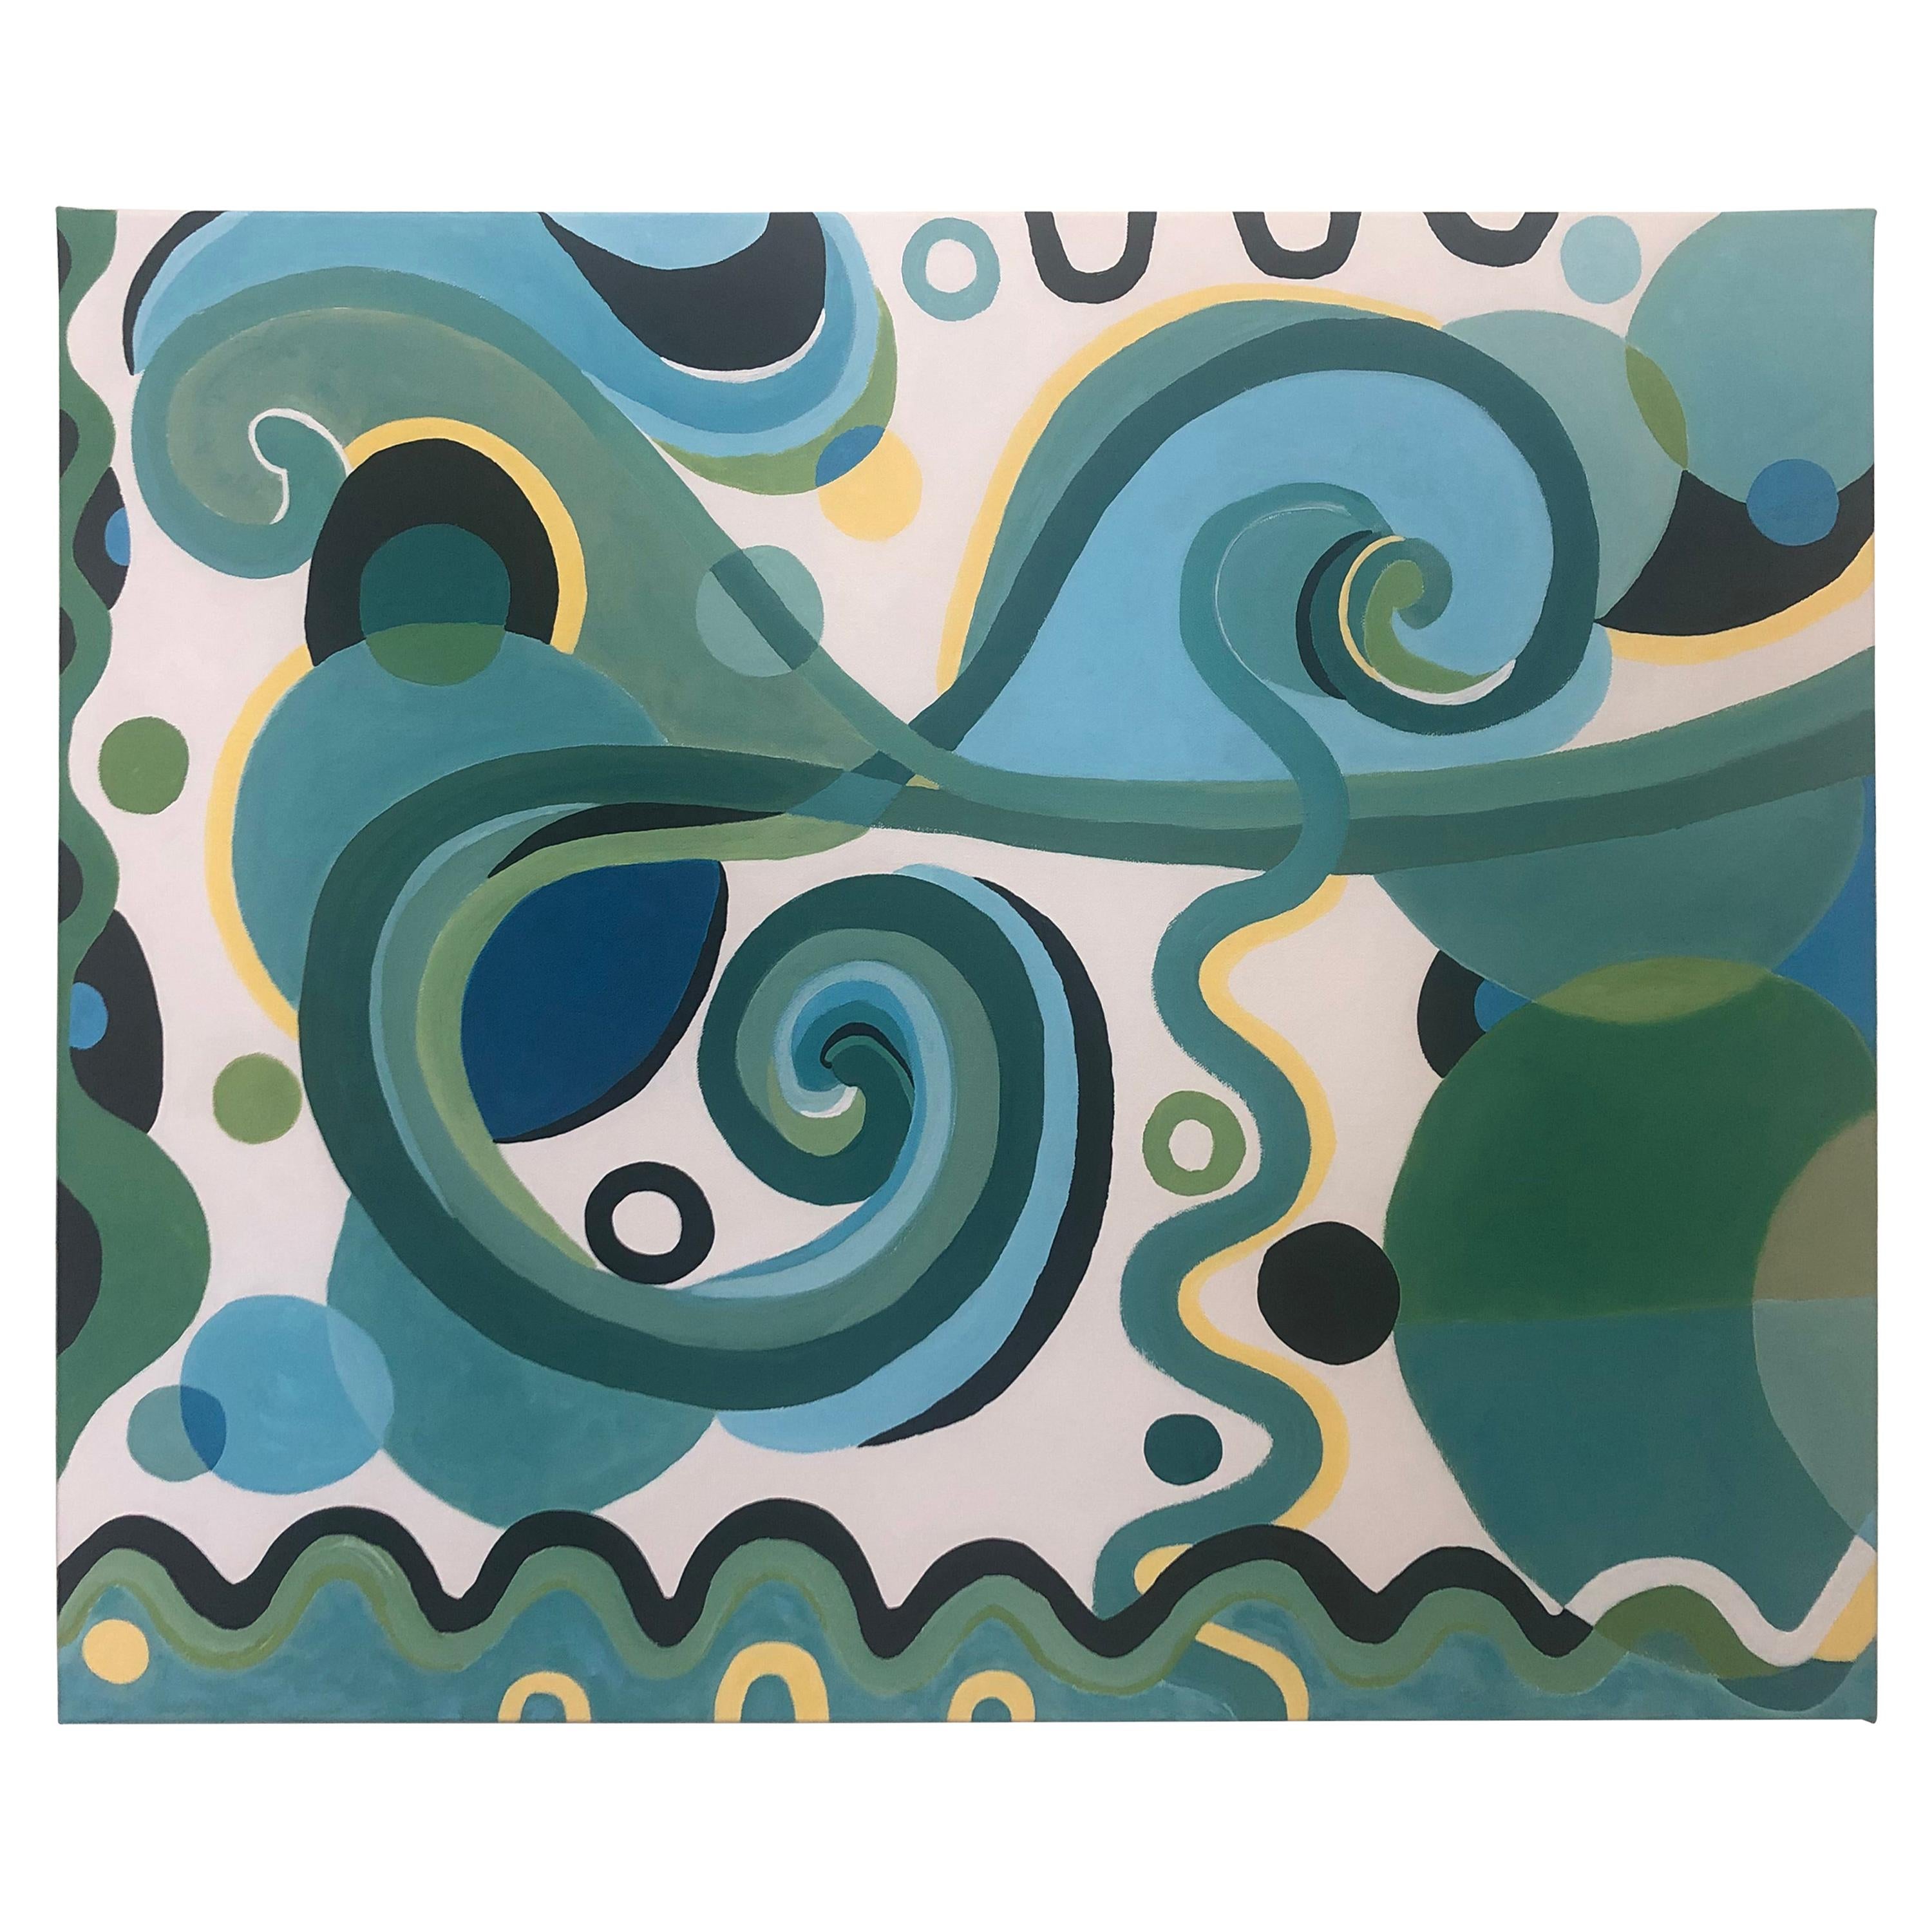 Refreshing "Jazzy" Abstract with Curlicues and Circles For Sale